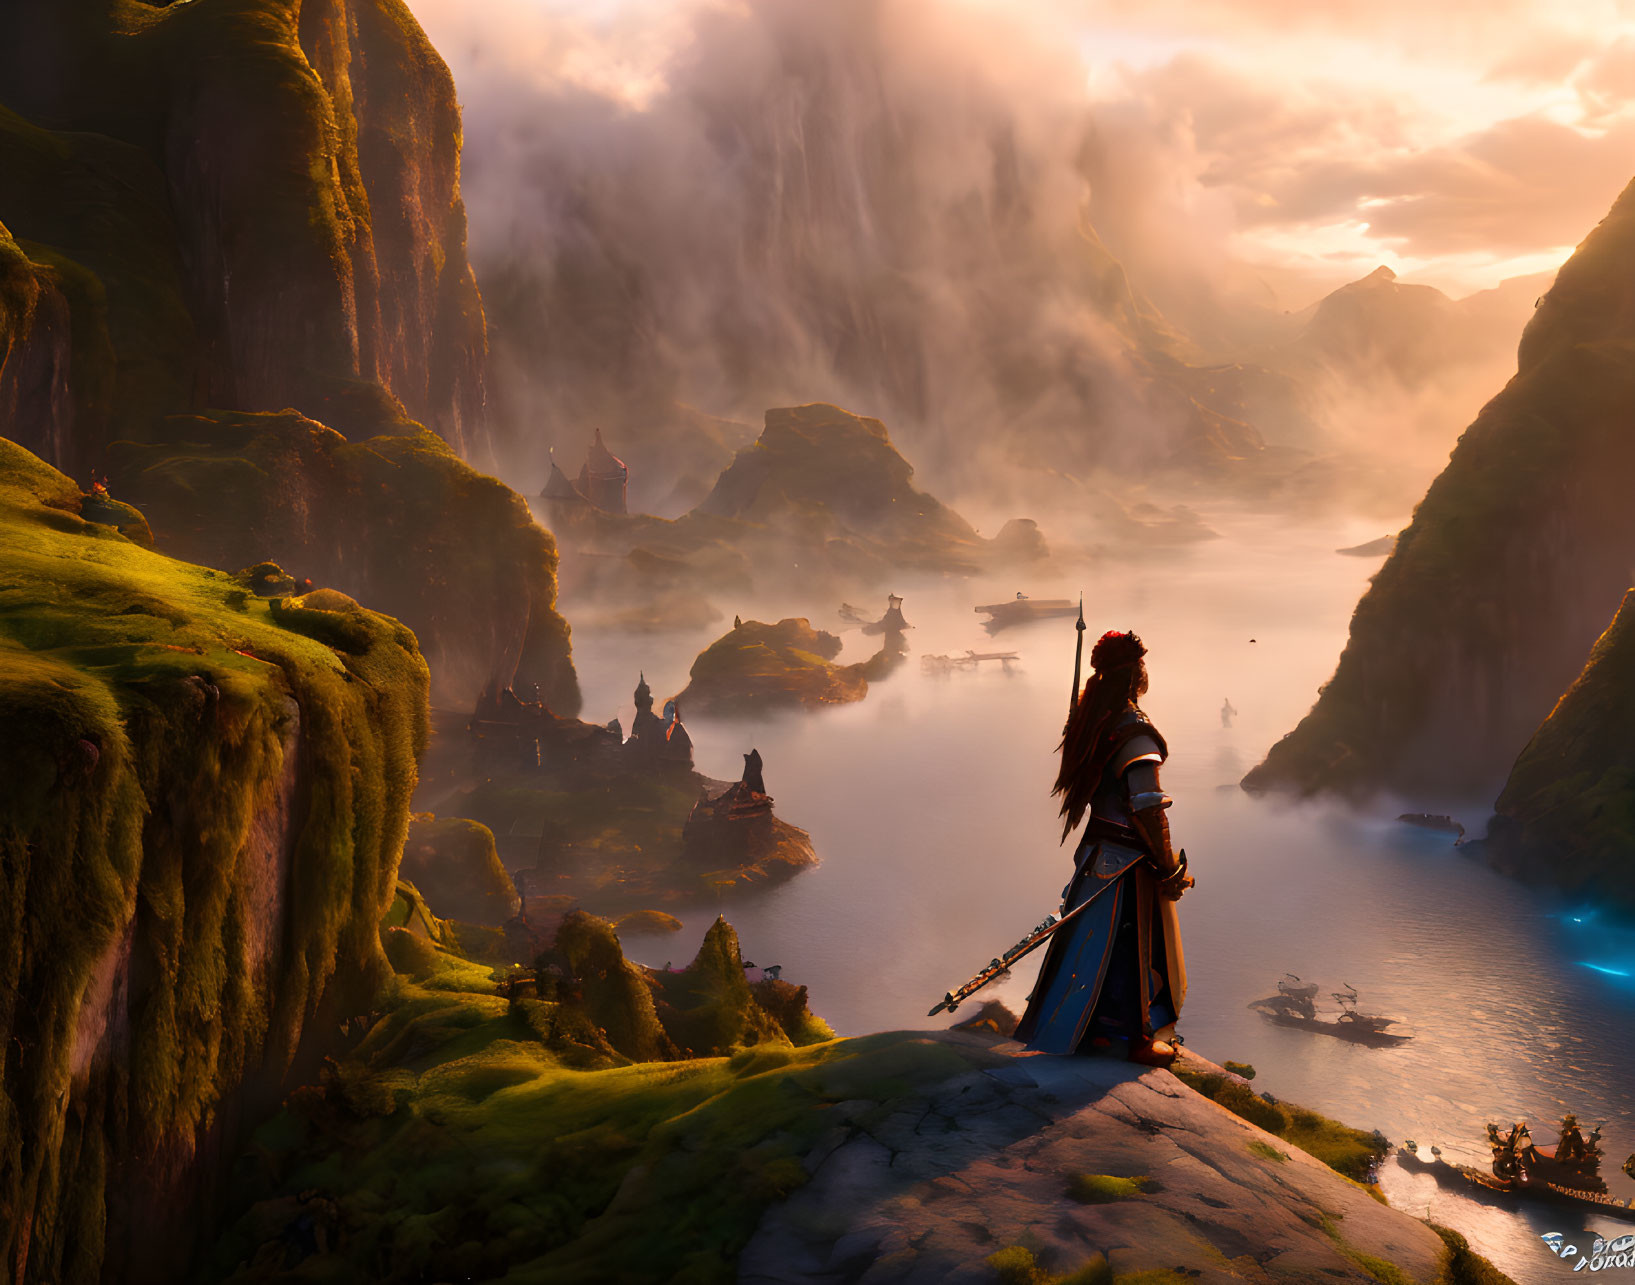 Warrior overlooking mystical valley with cliffs, misty waters, and ancient structures at sunrise or sunset